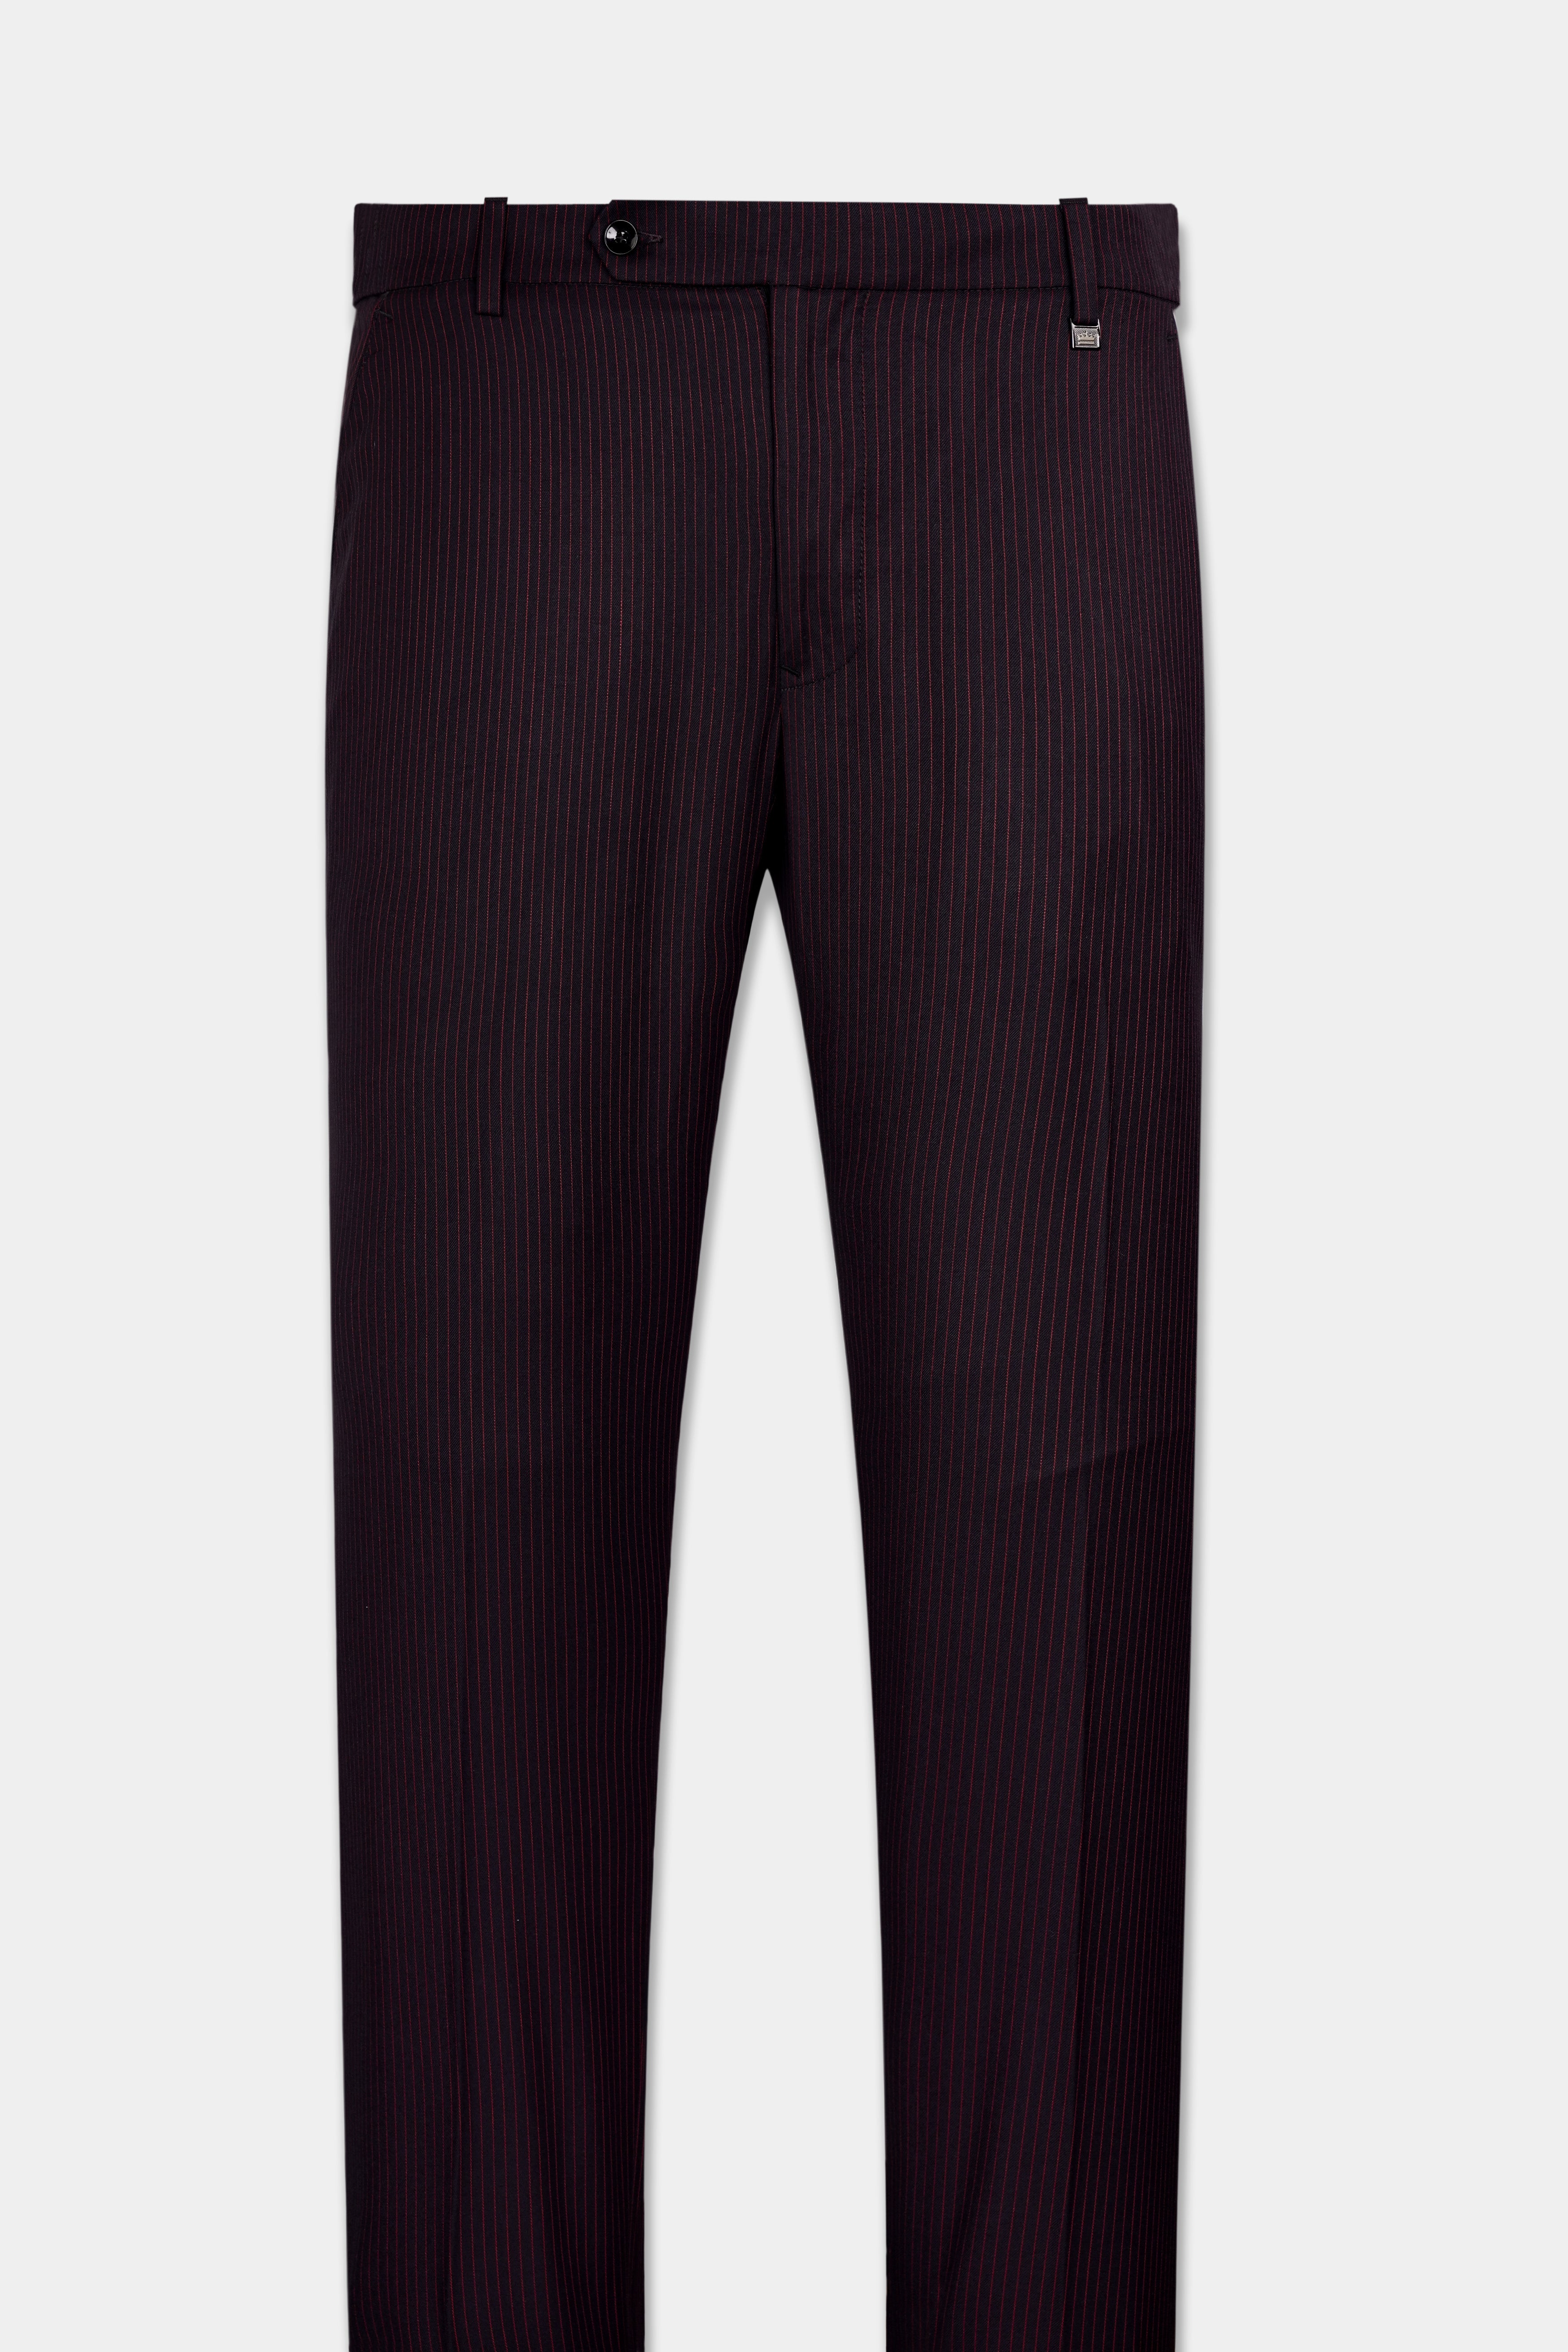 Onyx Maroon and Mandy Pink Striped Wool Rich Stretchable Waistband Pant